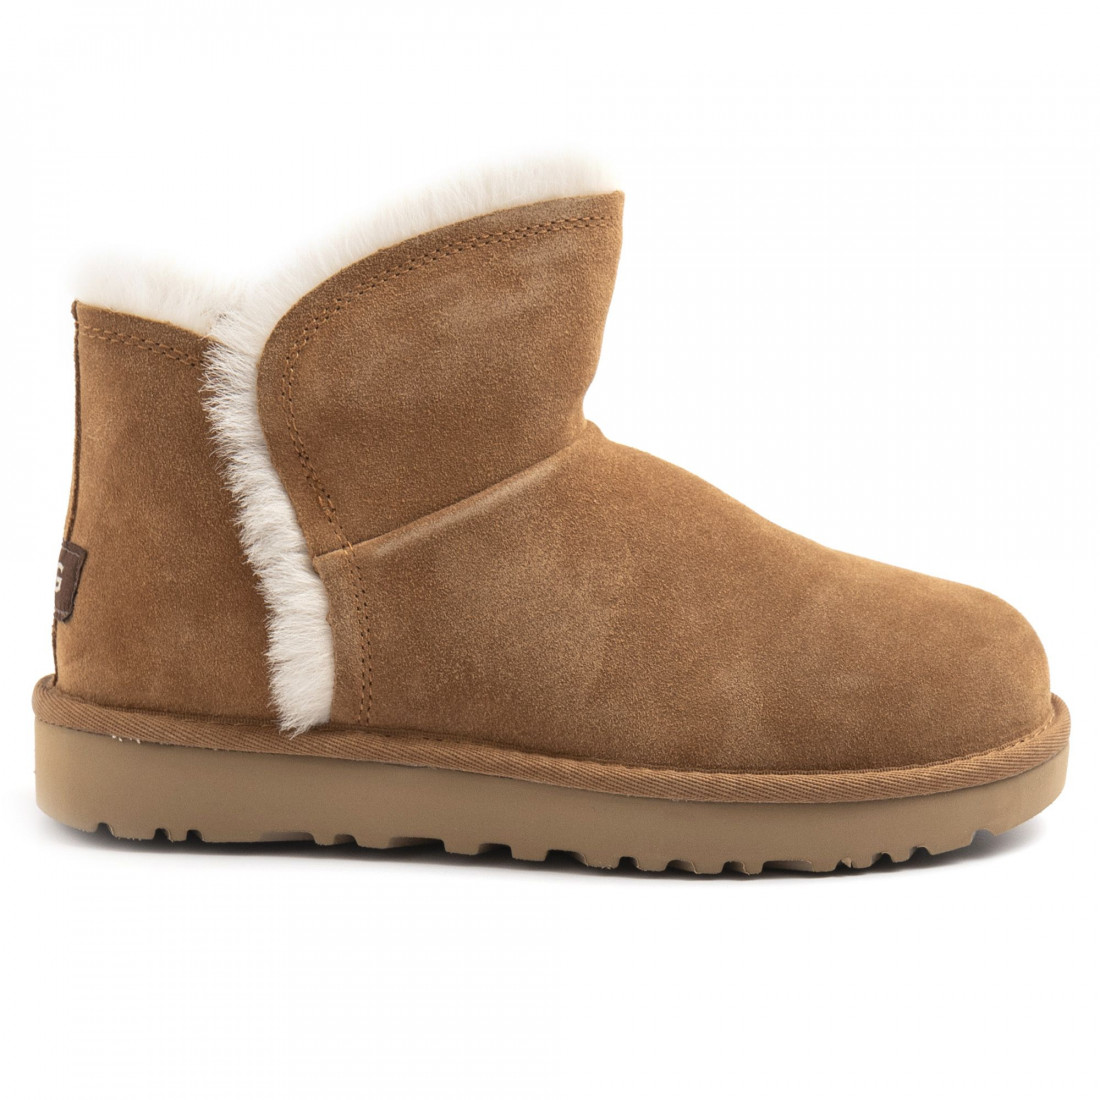 uggs chestnut boots